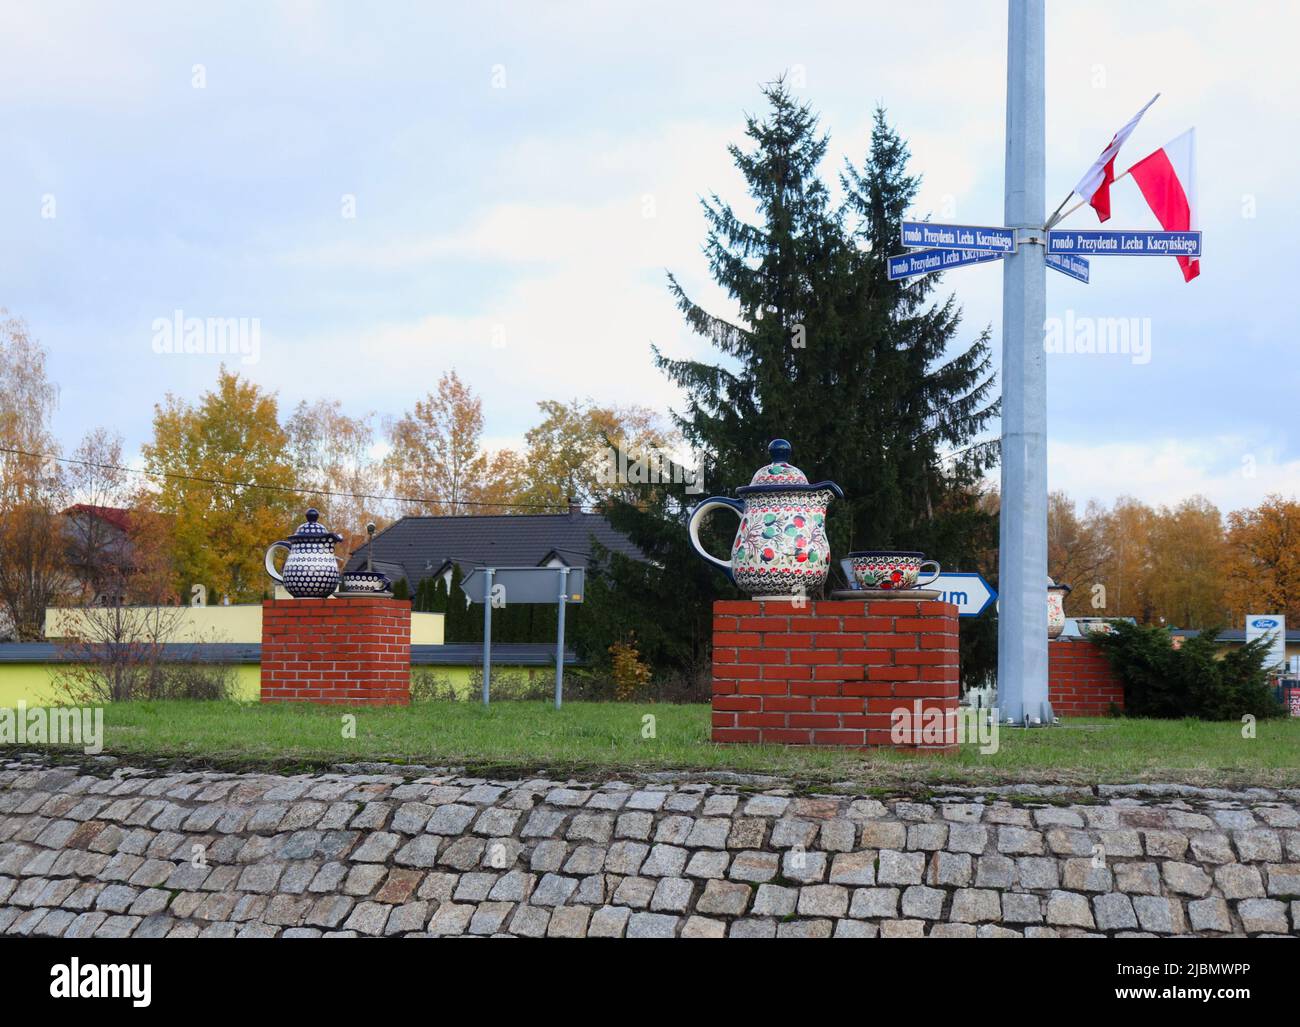 Flags on a pole with street signs above Polish pottery decorations in a roundabout in Boleslawiec, Poland on a fall day. Stock Photo